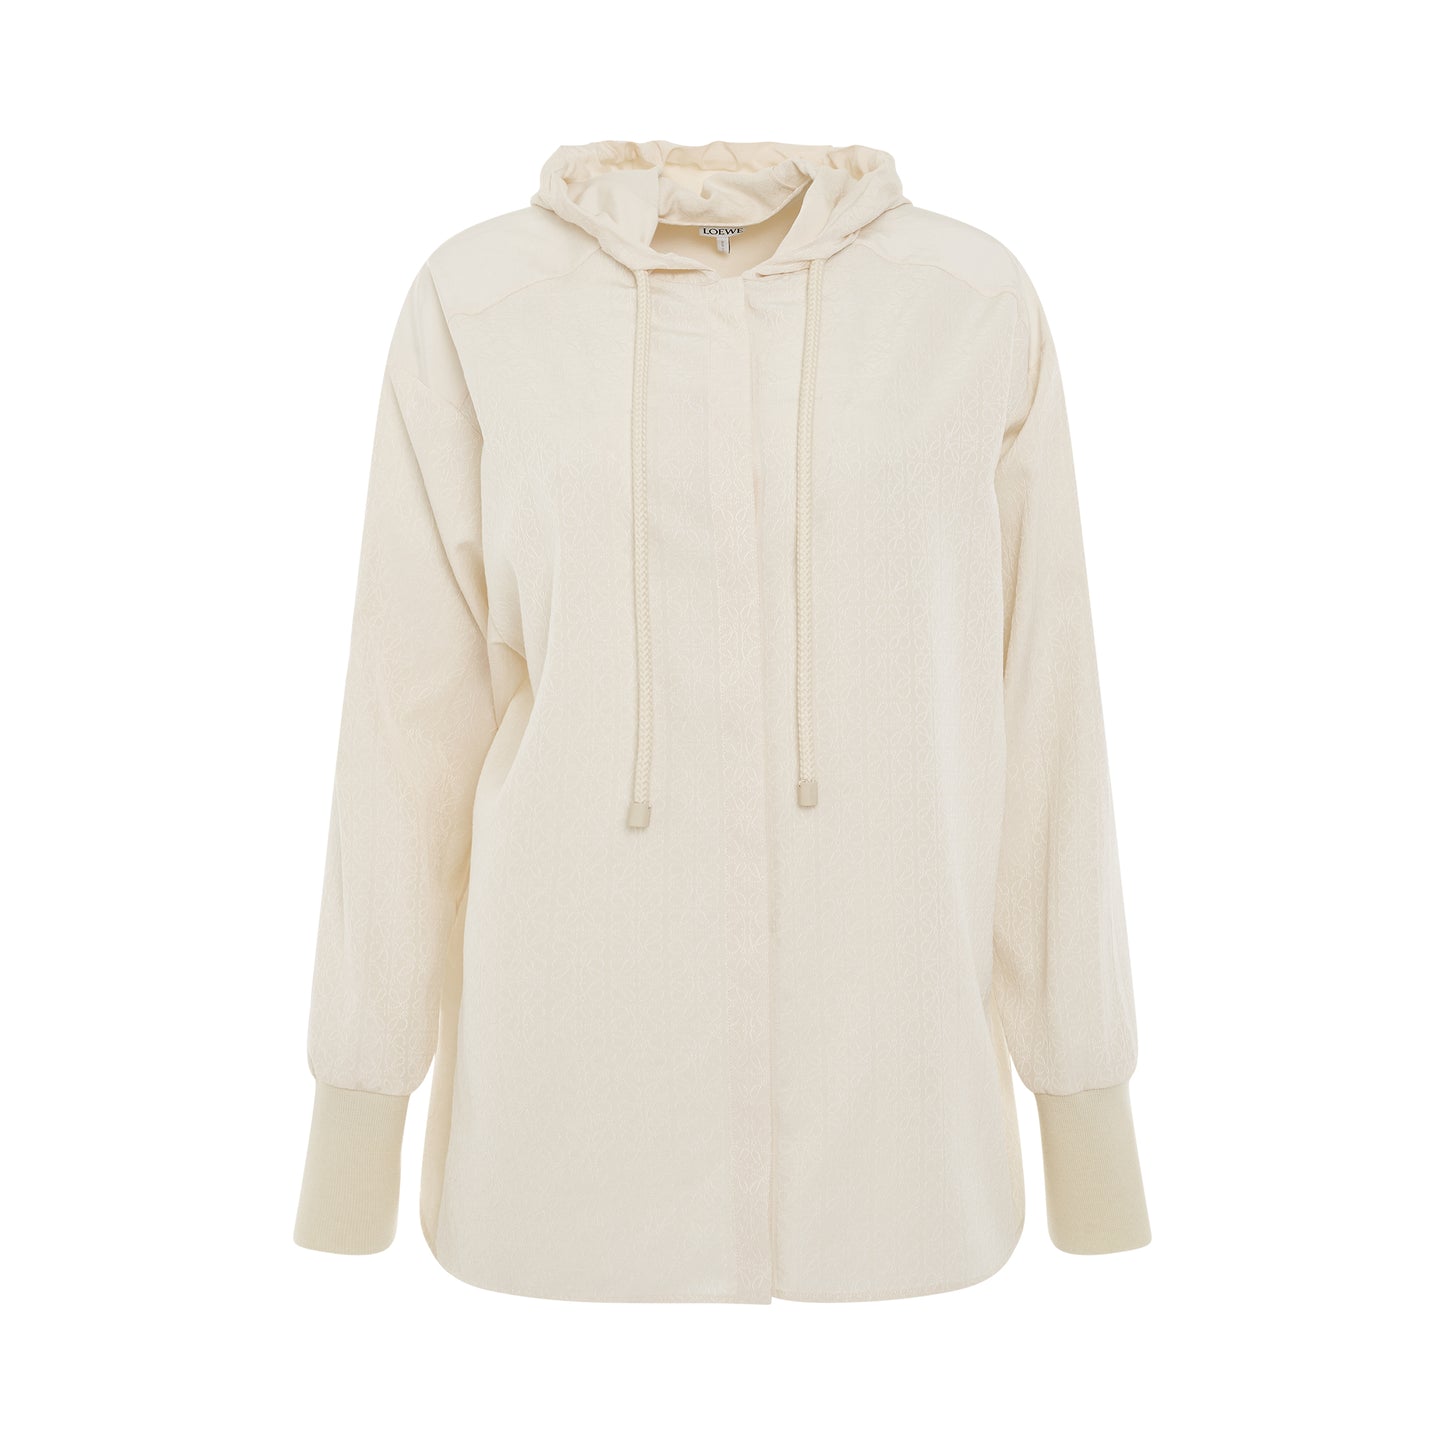 Anagram Jacquard Hooded Shirt in Ivory